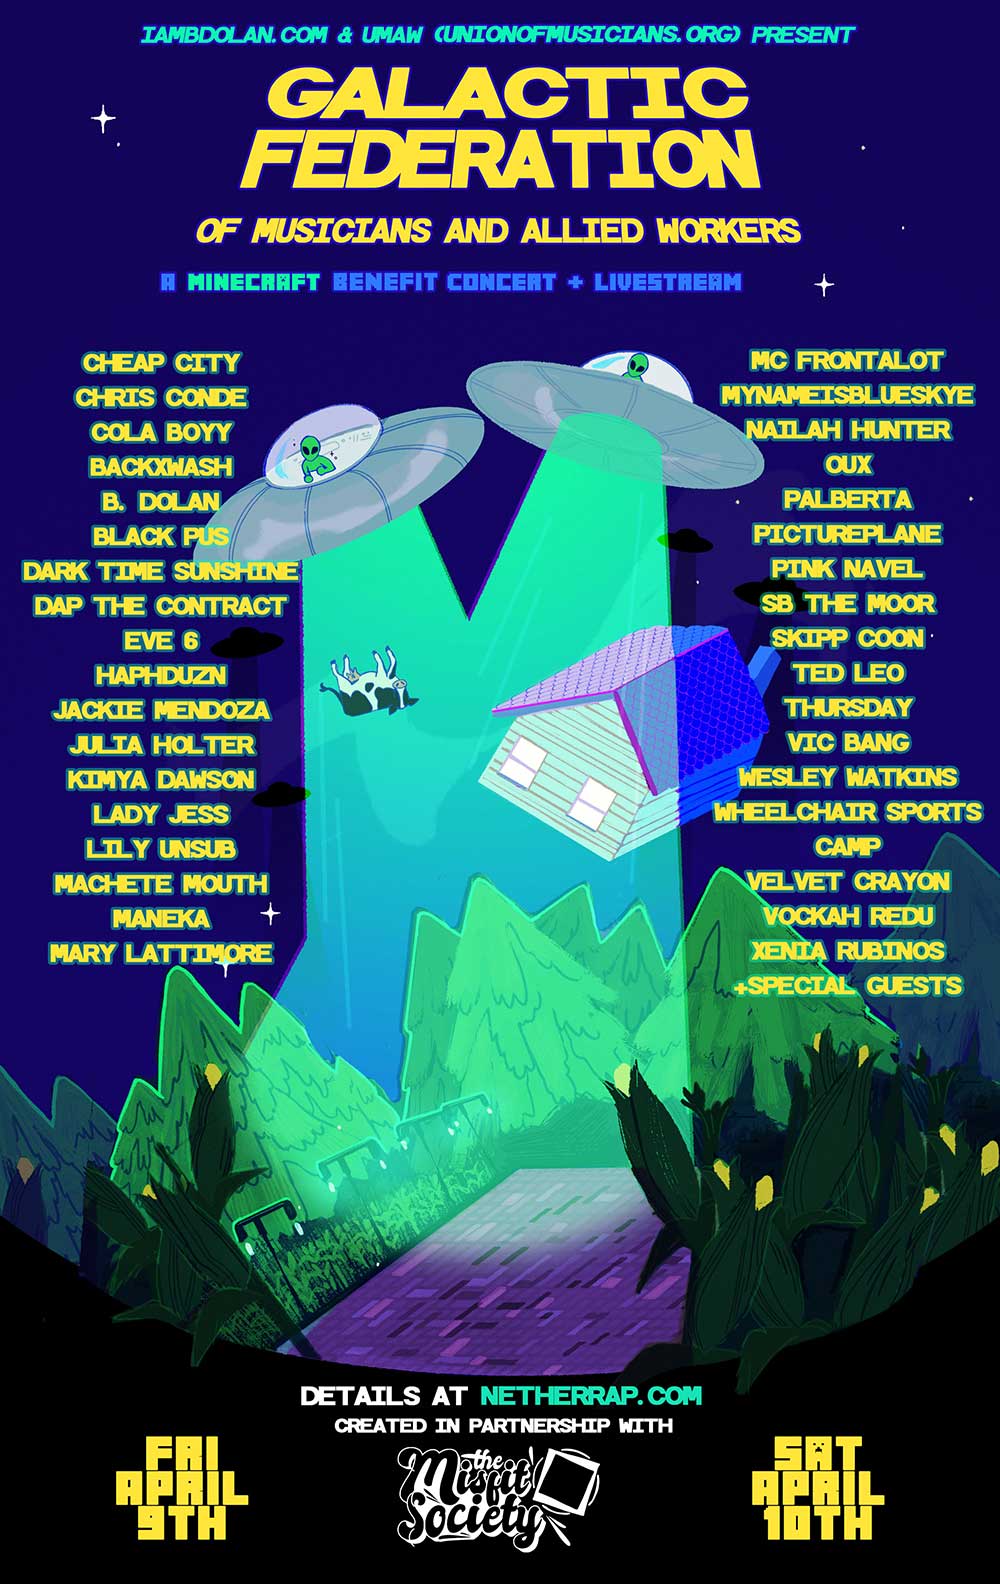 GALACTIC FEDERATION OF MUSICIANS AND ALLIED WORKERS - A Minecraft Benefit Concert + Livestream